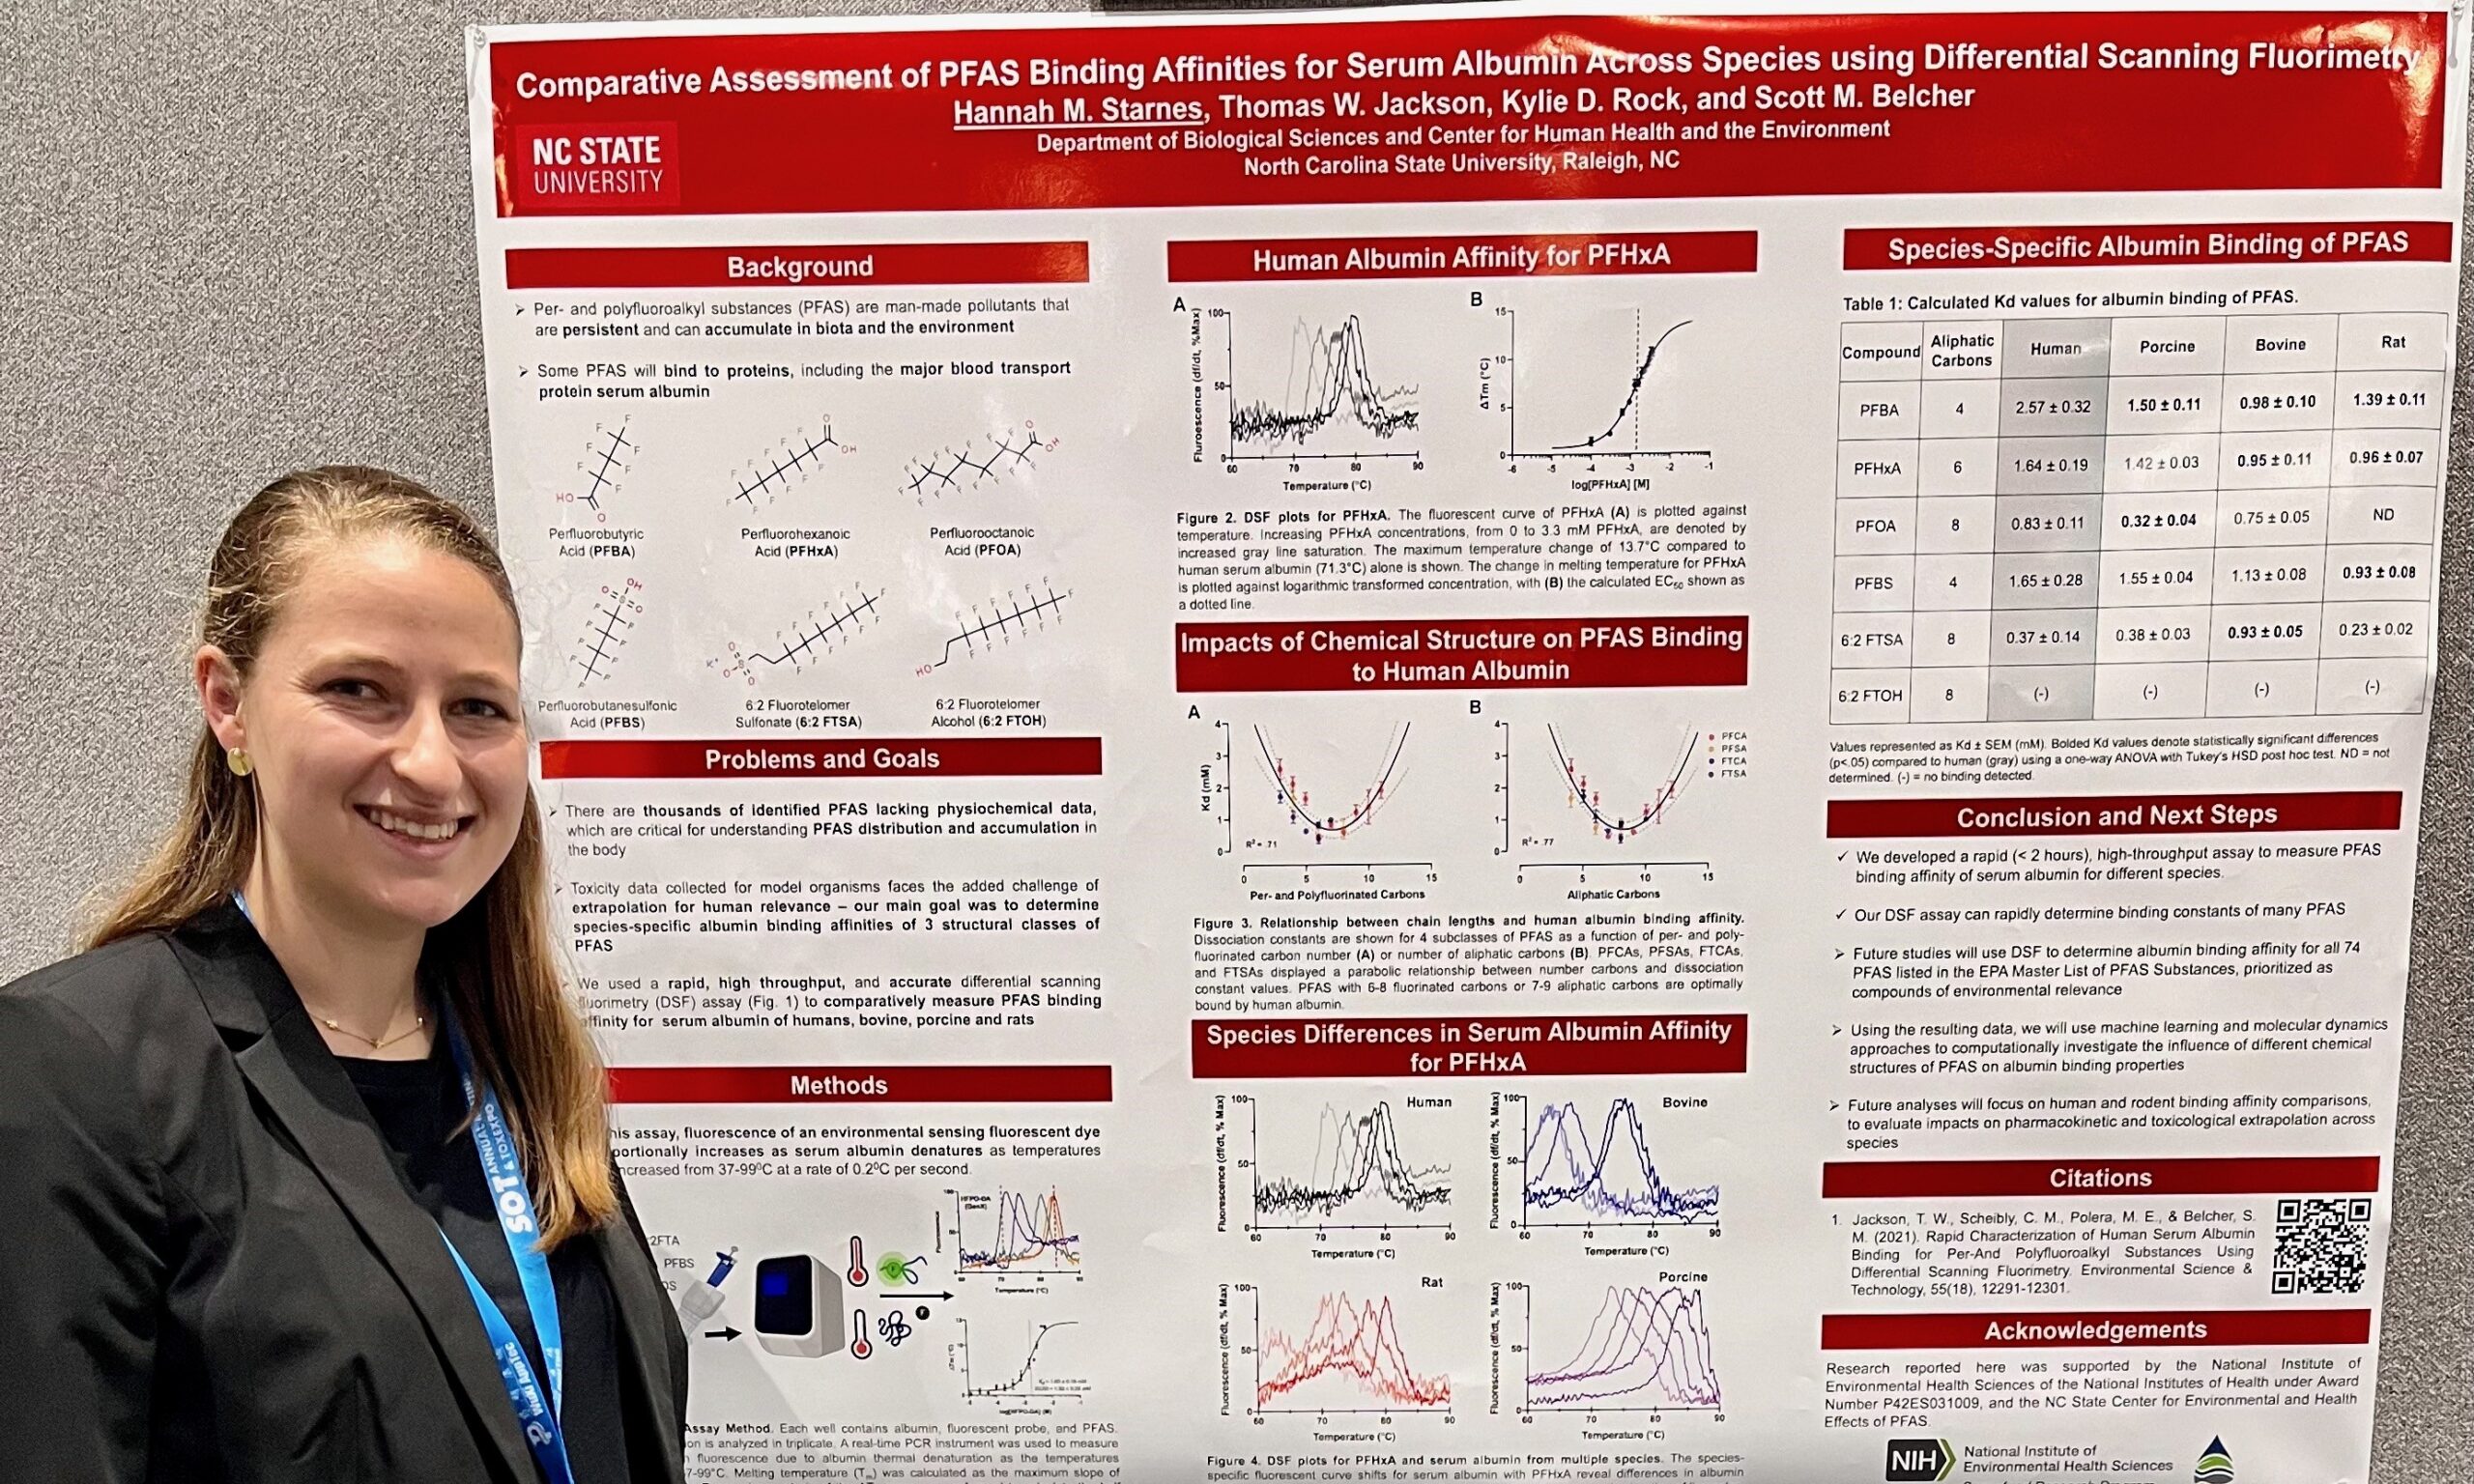 Hannah Starnes standing next to her poster entitled, "Comparative Assessment of PFAS Binding Affinities for Serum Albumin Across Species using Differential Scanning Flourimetry."